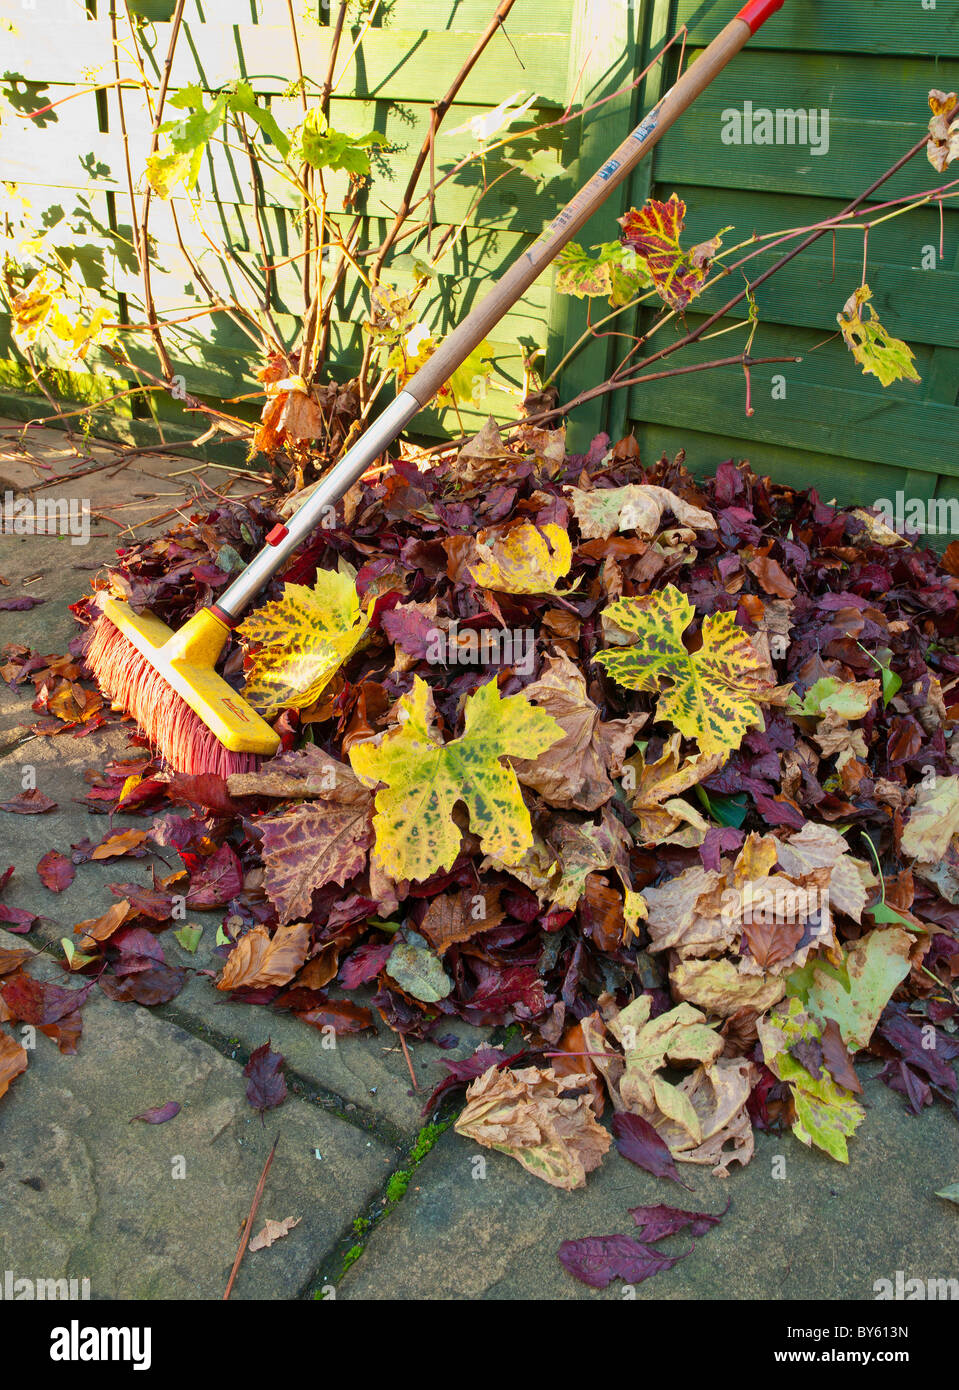 PILE OF AUTUMN LEAVES ON PATIO WITH BRUSH Stock Photo